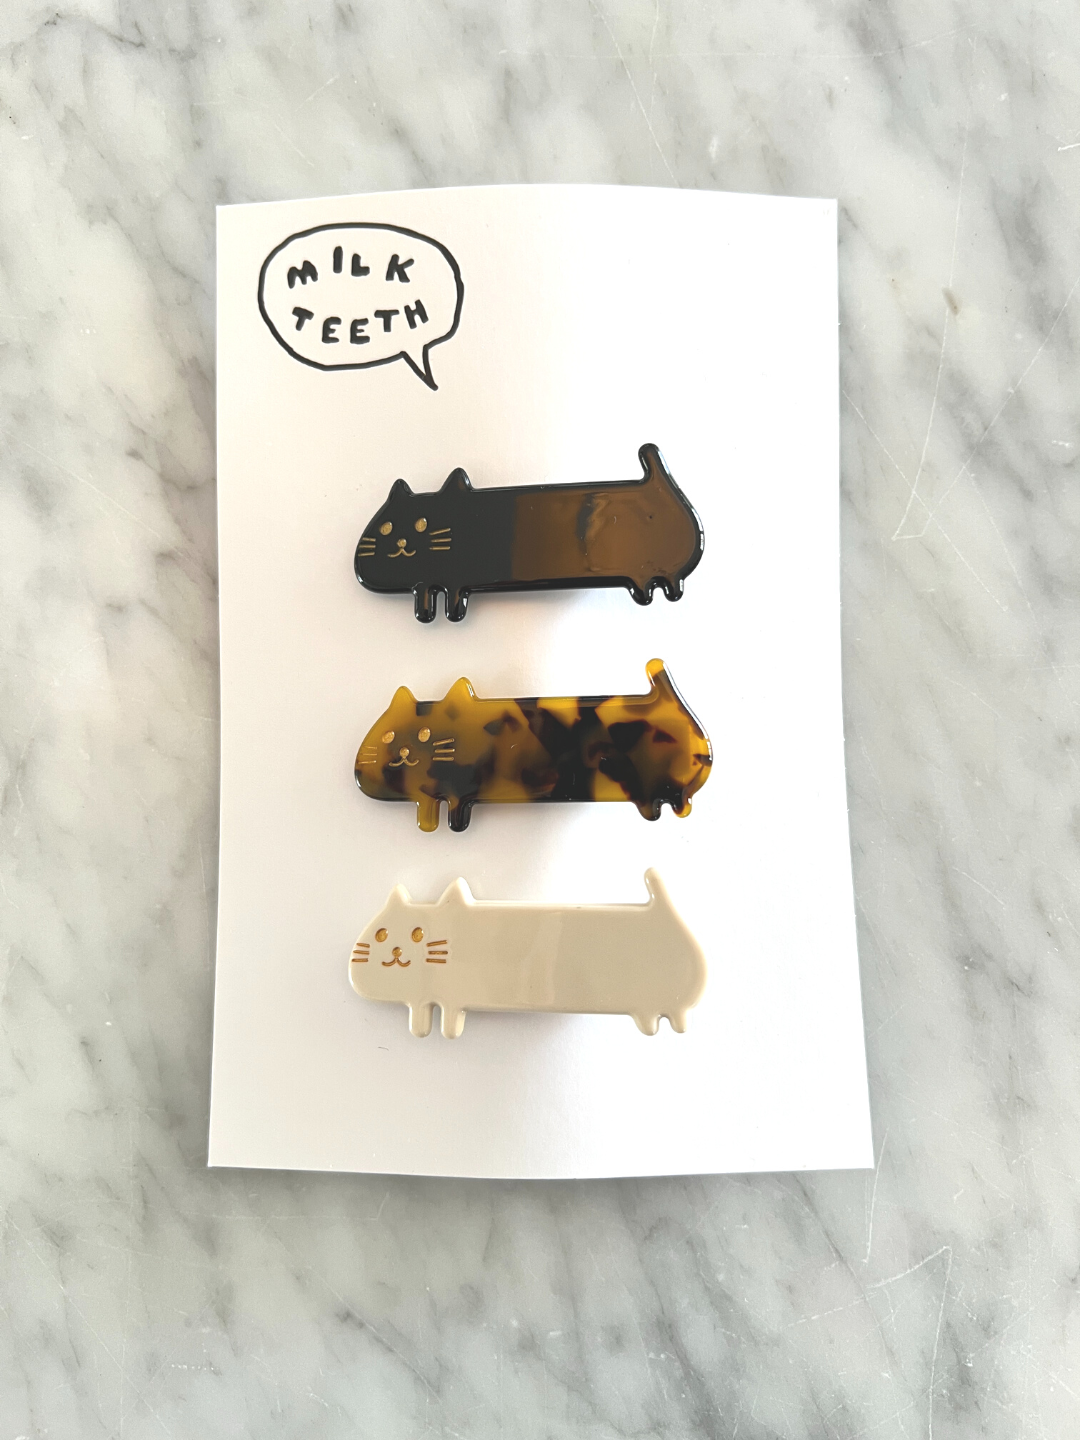 A Milk Teeth presentation card containing three kids' barrettes in the shape of elongated cats; one black, one tortoiseshell, one white